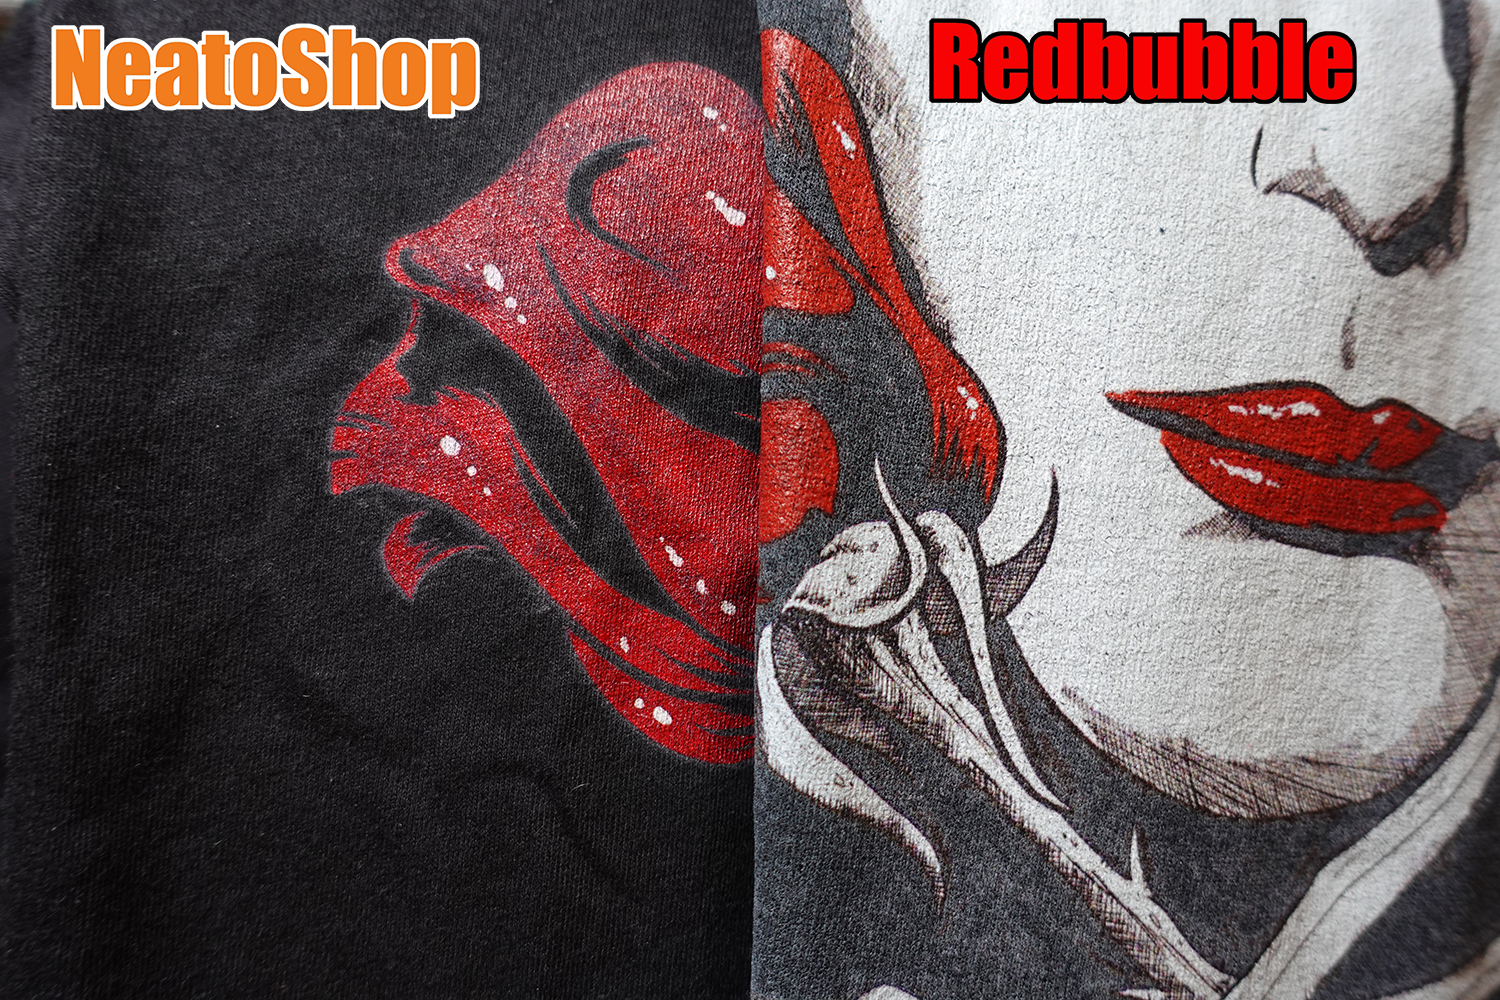 NeatoShop Vs Redbubble Side By Side Print Comparison 1